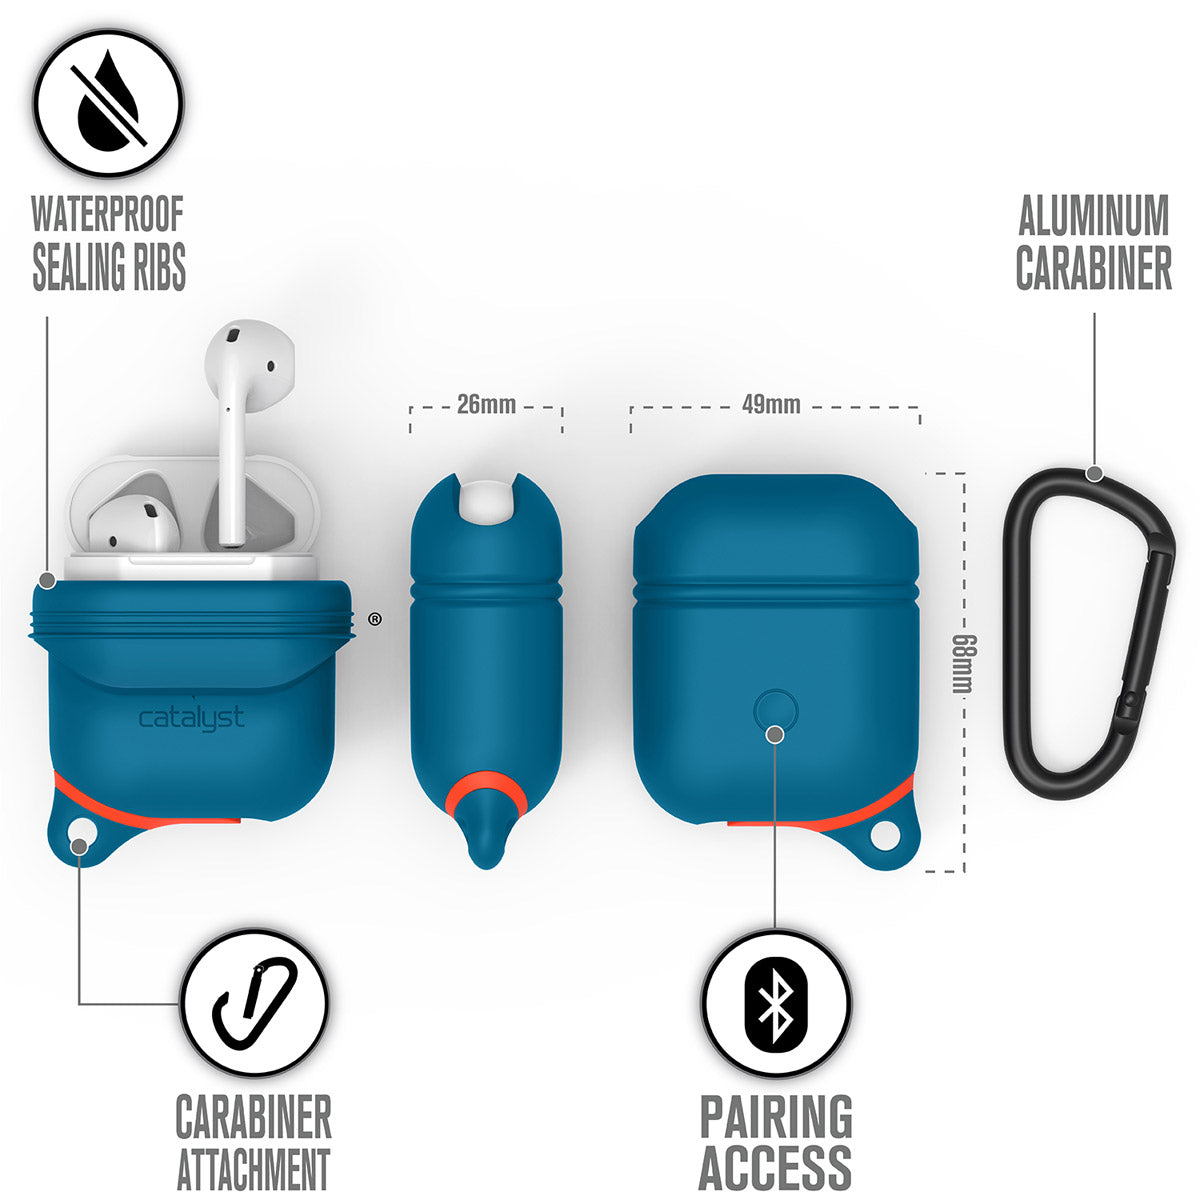 Catalyst airpods gen2/1 waterproof case + carabiner showing the case dimension and features in blueridge sunset text reads waterproof sealing ribs aluminum carabiner pairing access carabiner attachment